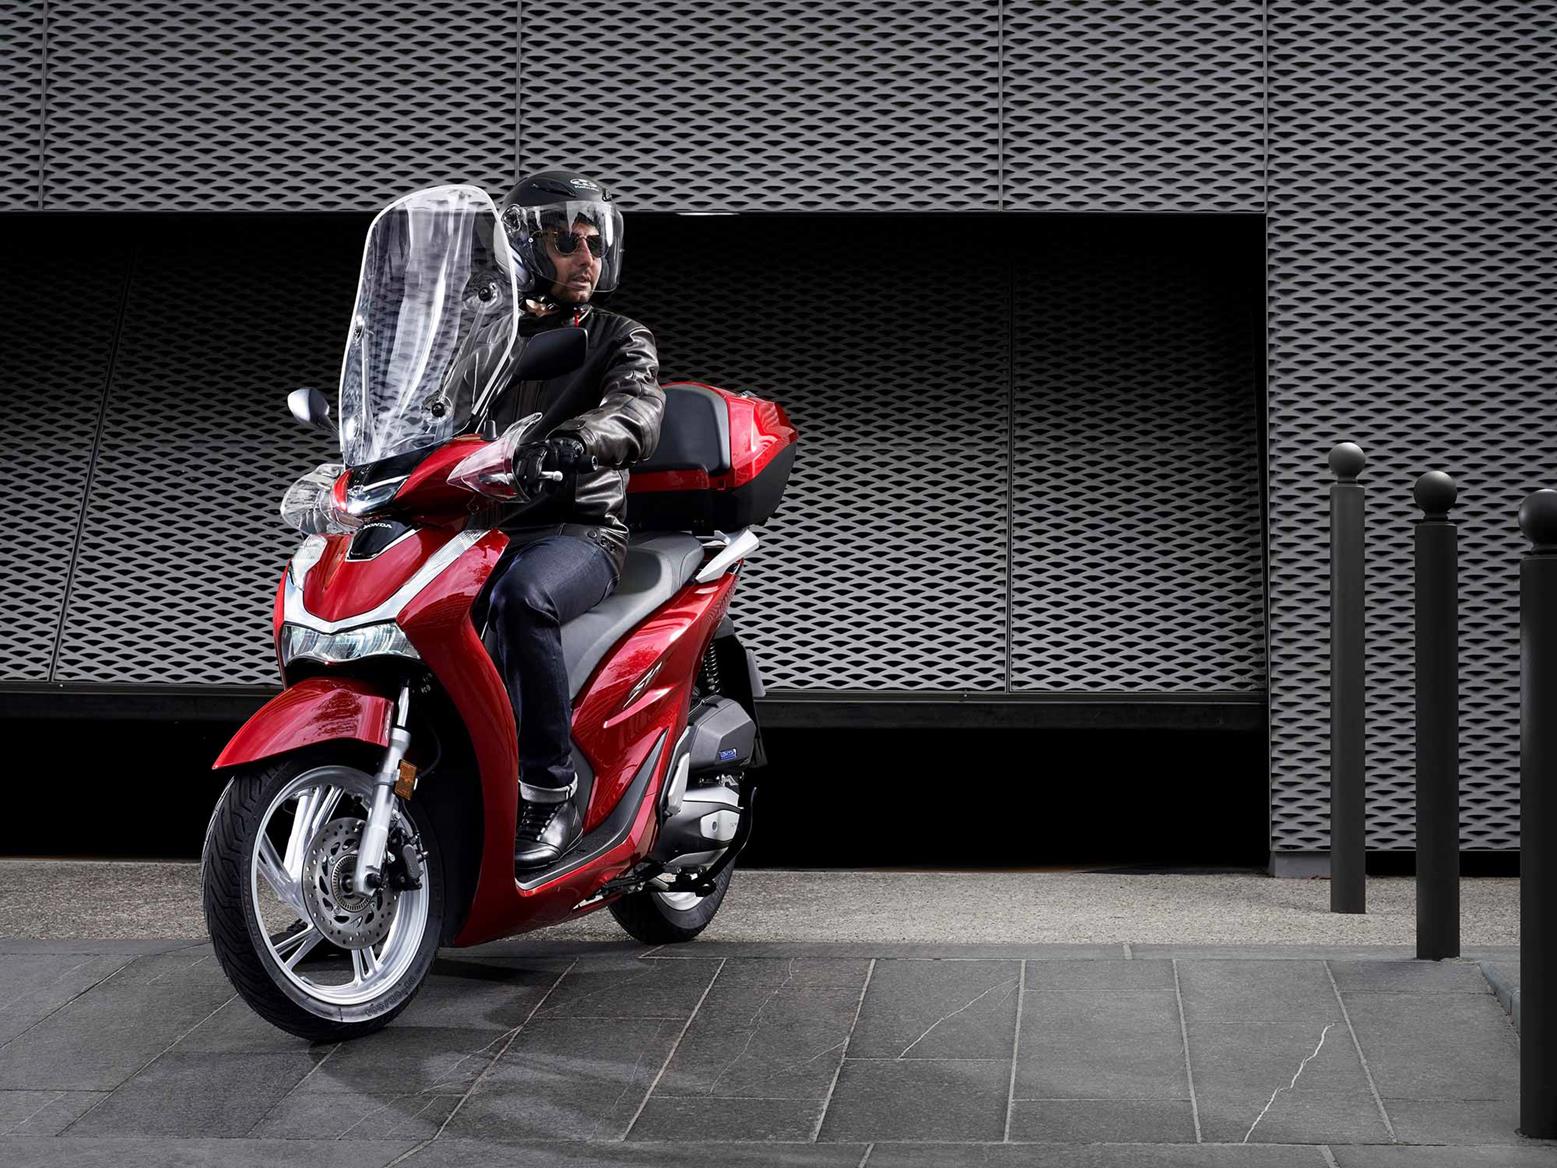 2020 Honda Sh125i Gains Greater Storage And Improved Performance Mcn